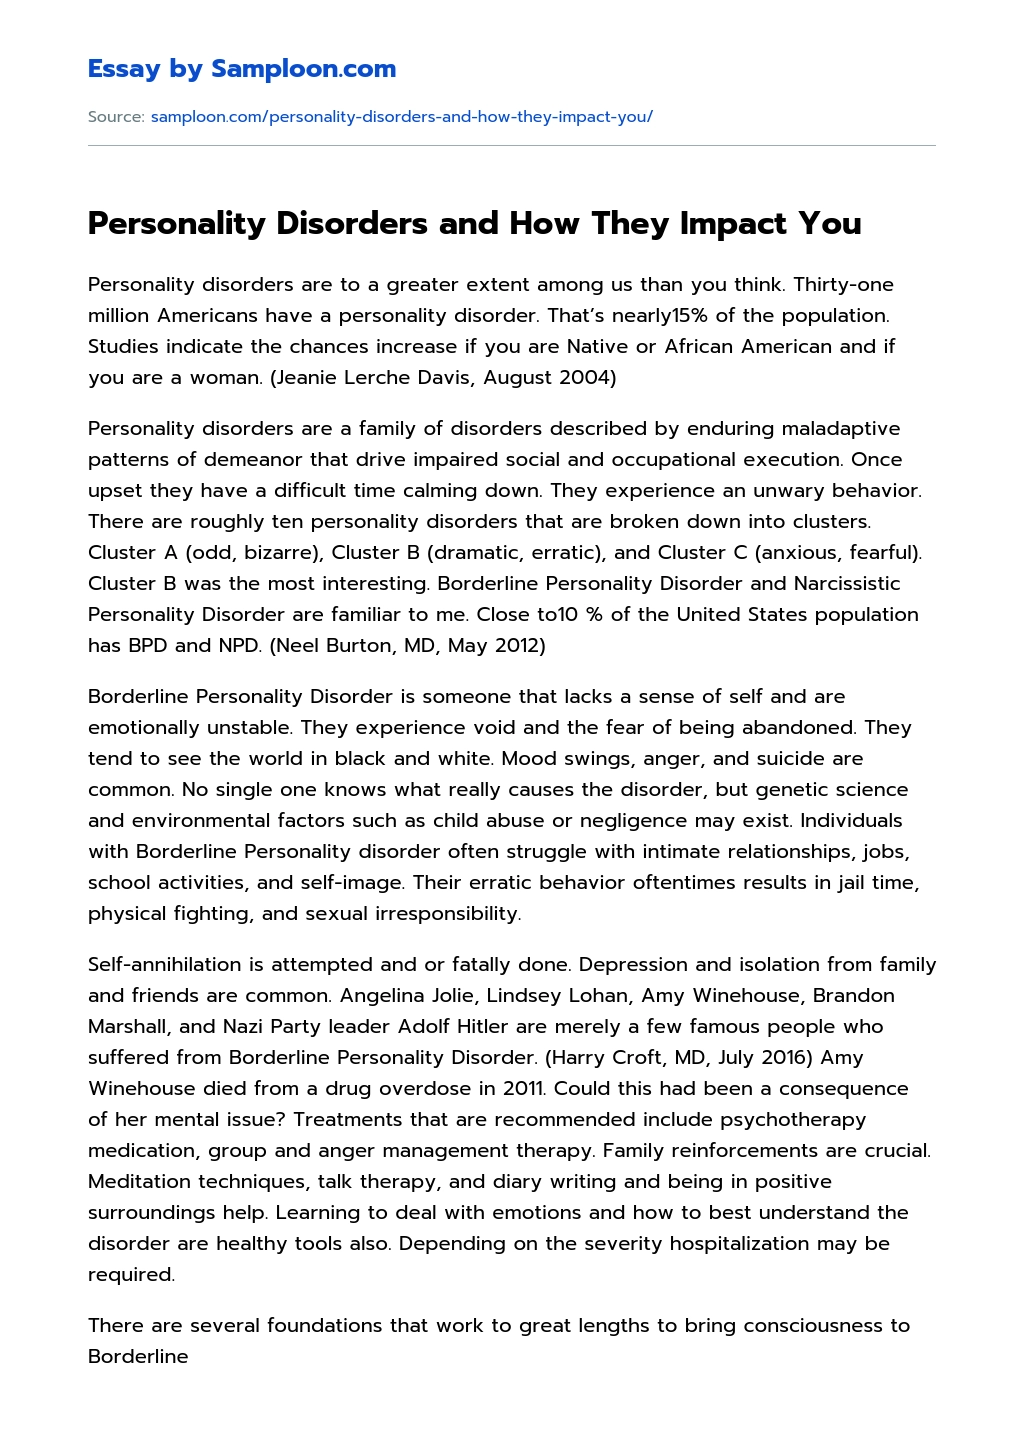 Personality Disorders and How They Impact You essay